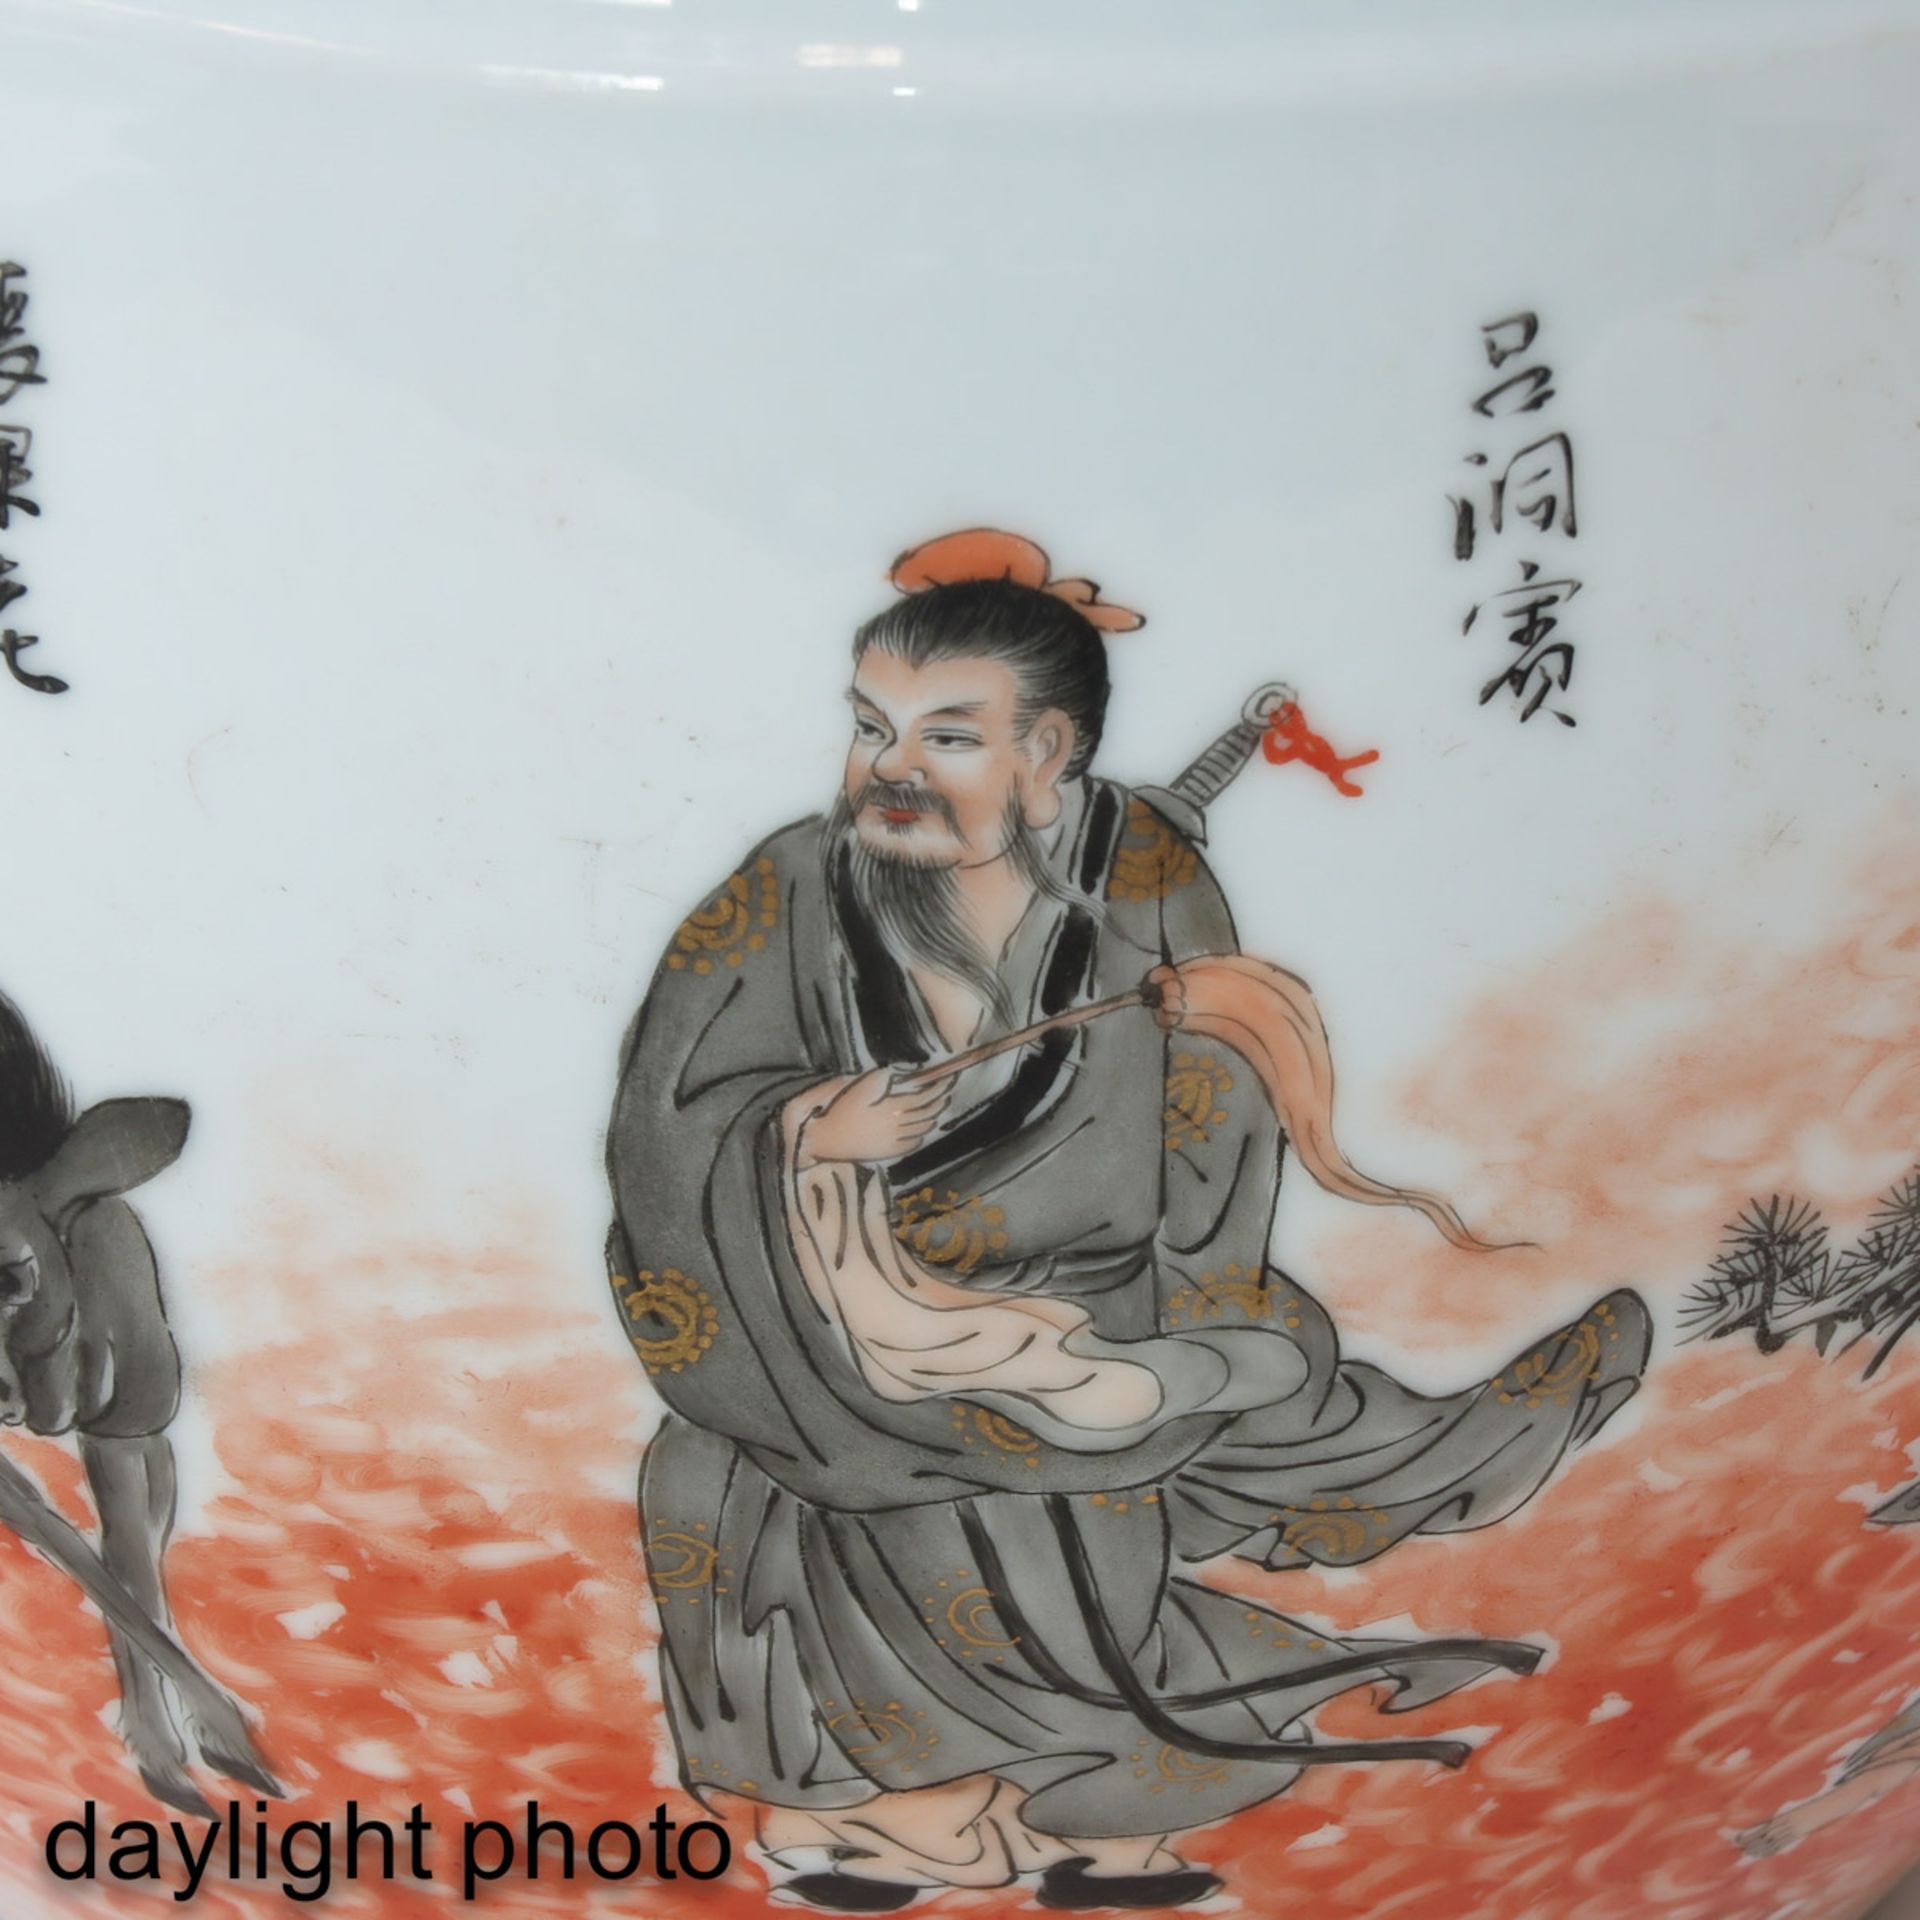 A Polyhchrome Decor Fish Bowl - Image 10 of 10